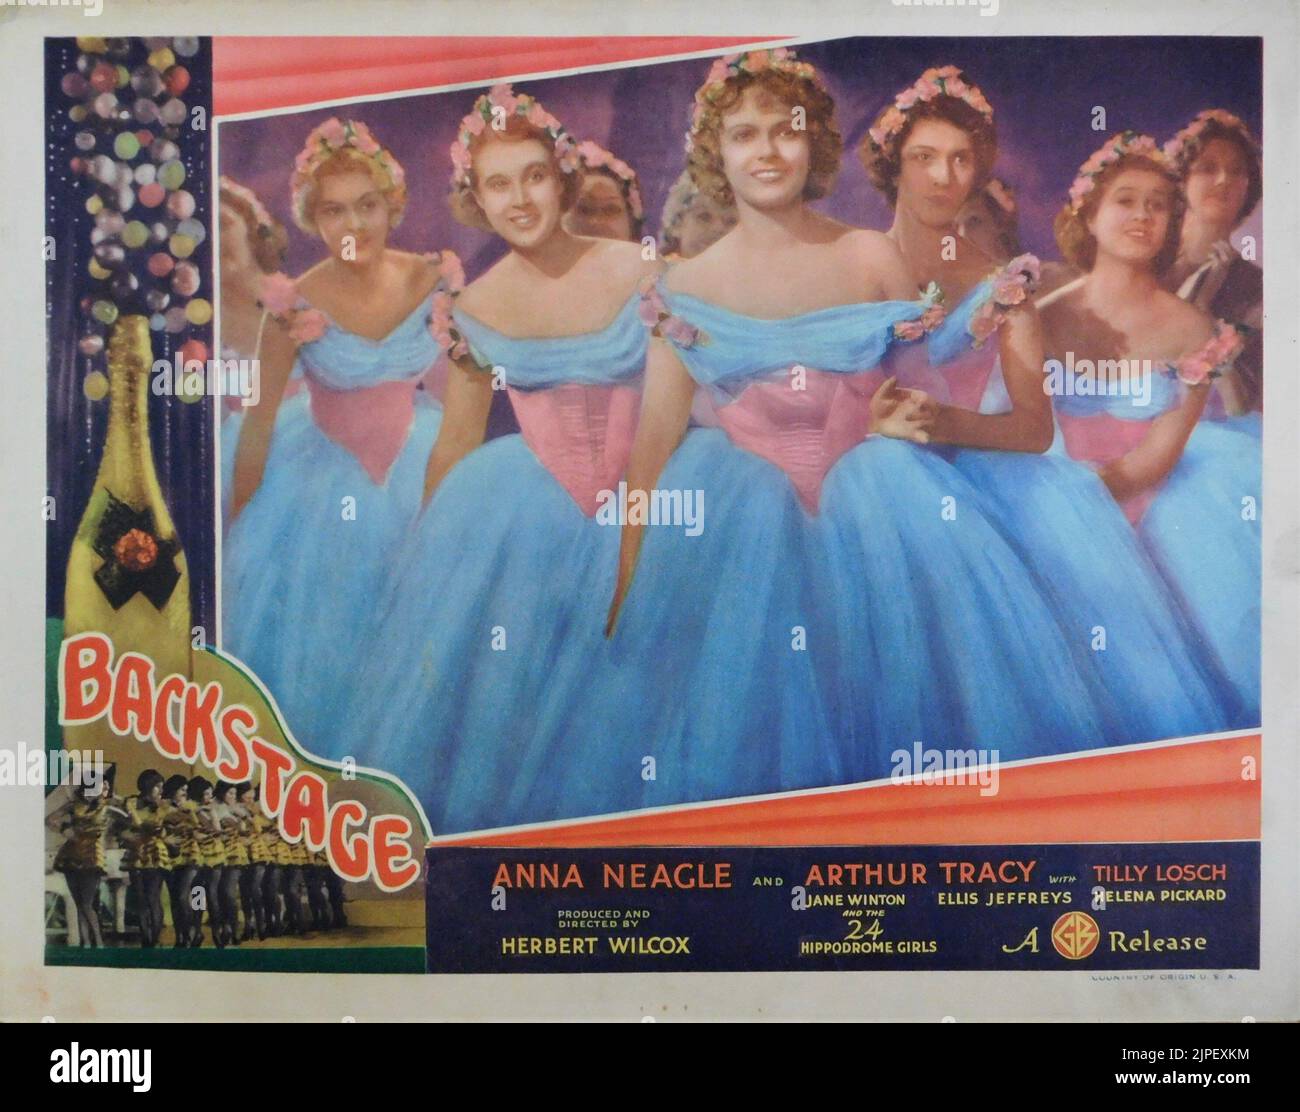 Originalveröffentlichung US Lobby Card for ANNA NEAGLE (Mitte) with other Chorus Girls in LIMELIGHT (UK) / BACKSTAGE (US) 1937 Regisseur HERBERT WILCOX Kinematografie Freddie Young Herbert Wilcox Productions / Gaumont British Picture Corporation of America (in den USA) Stockfoto